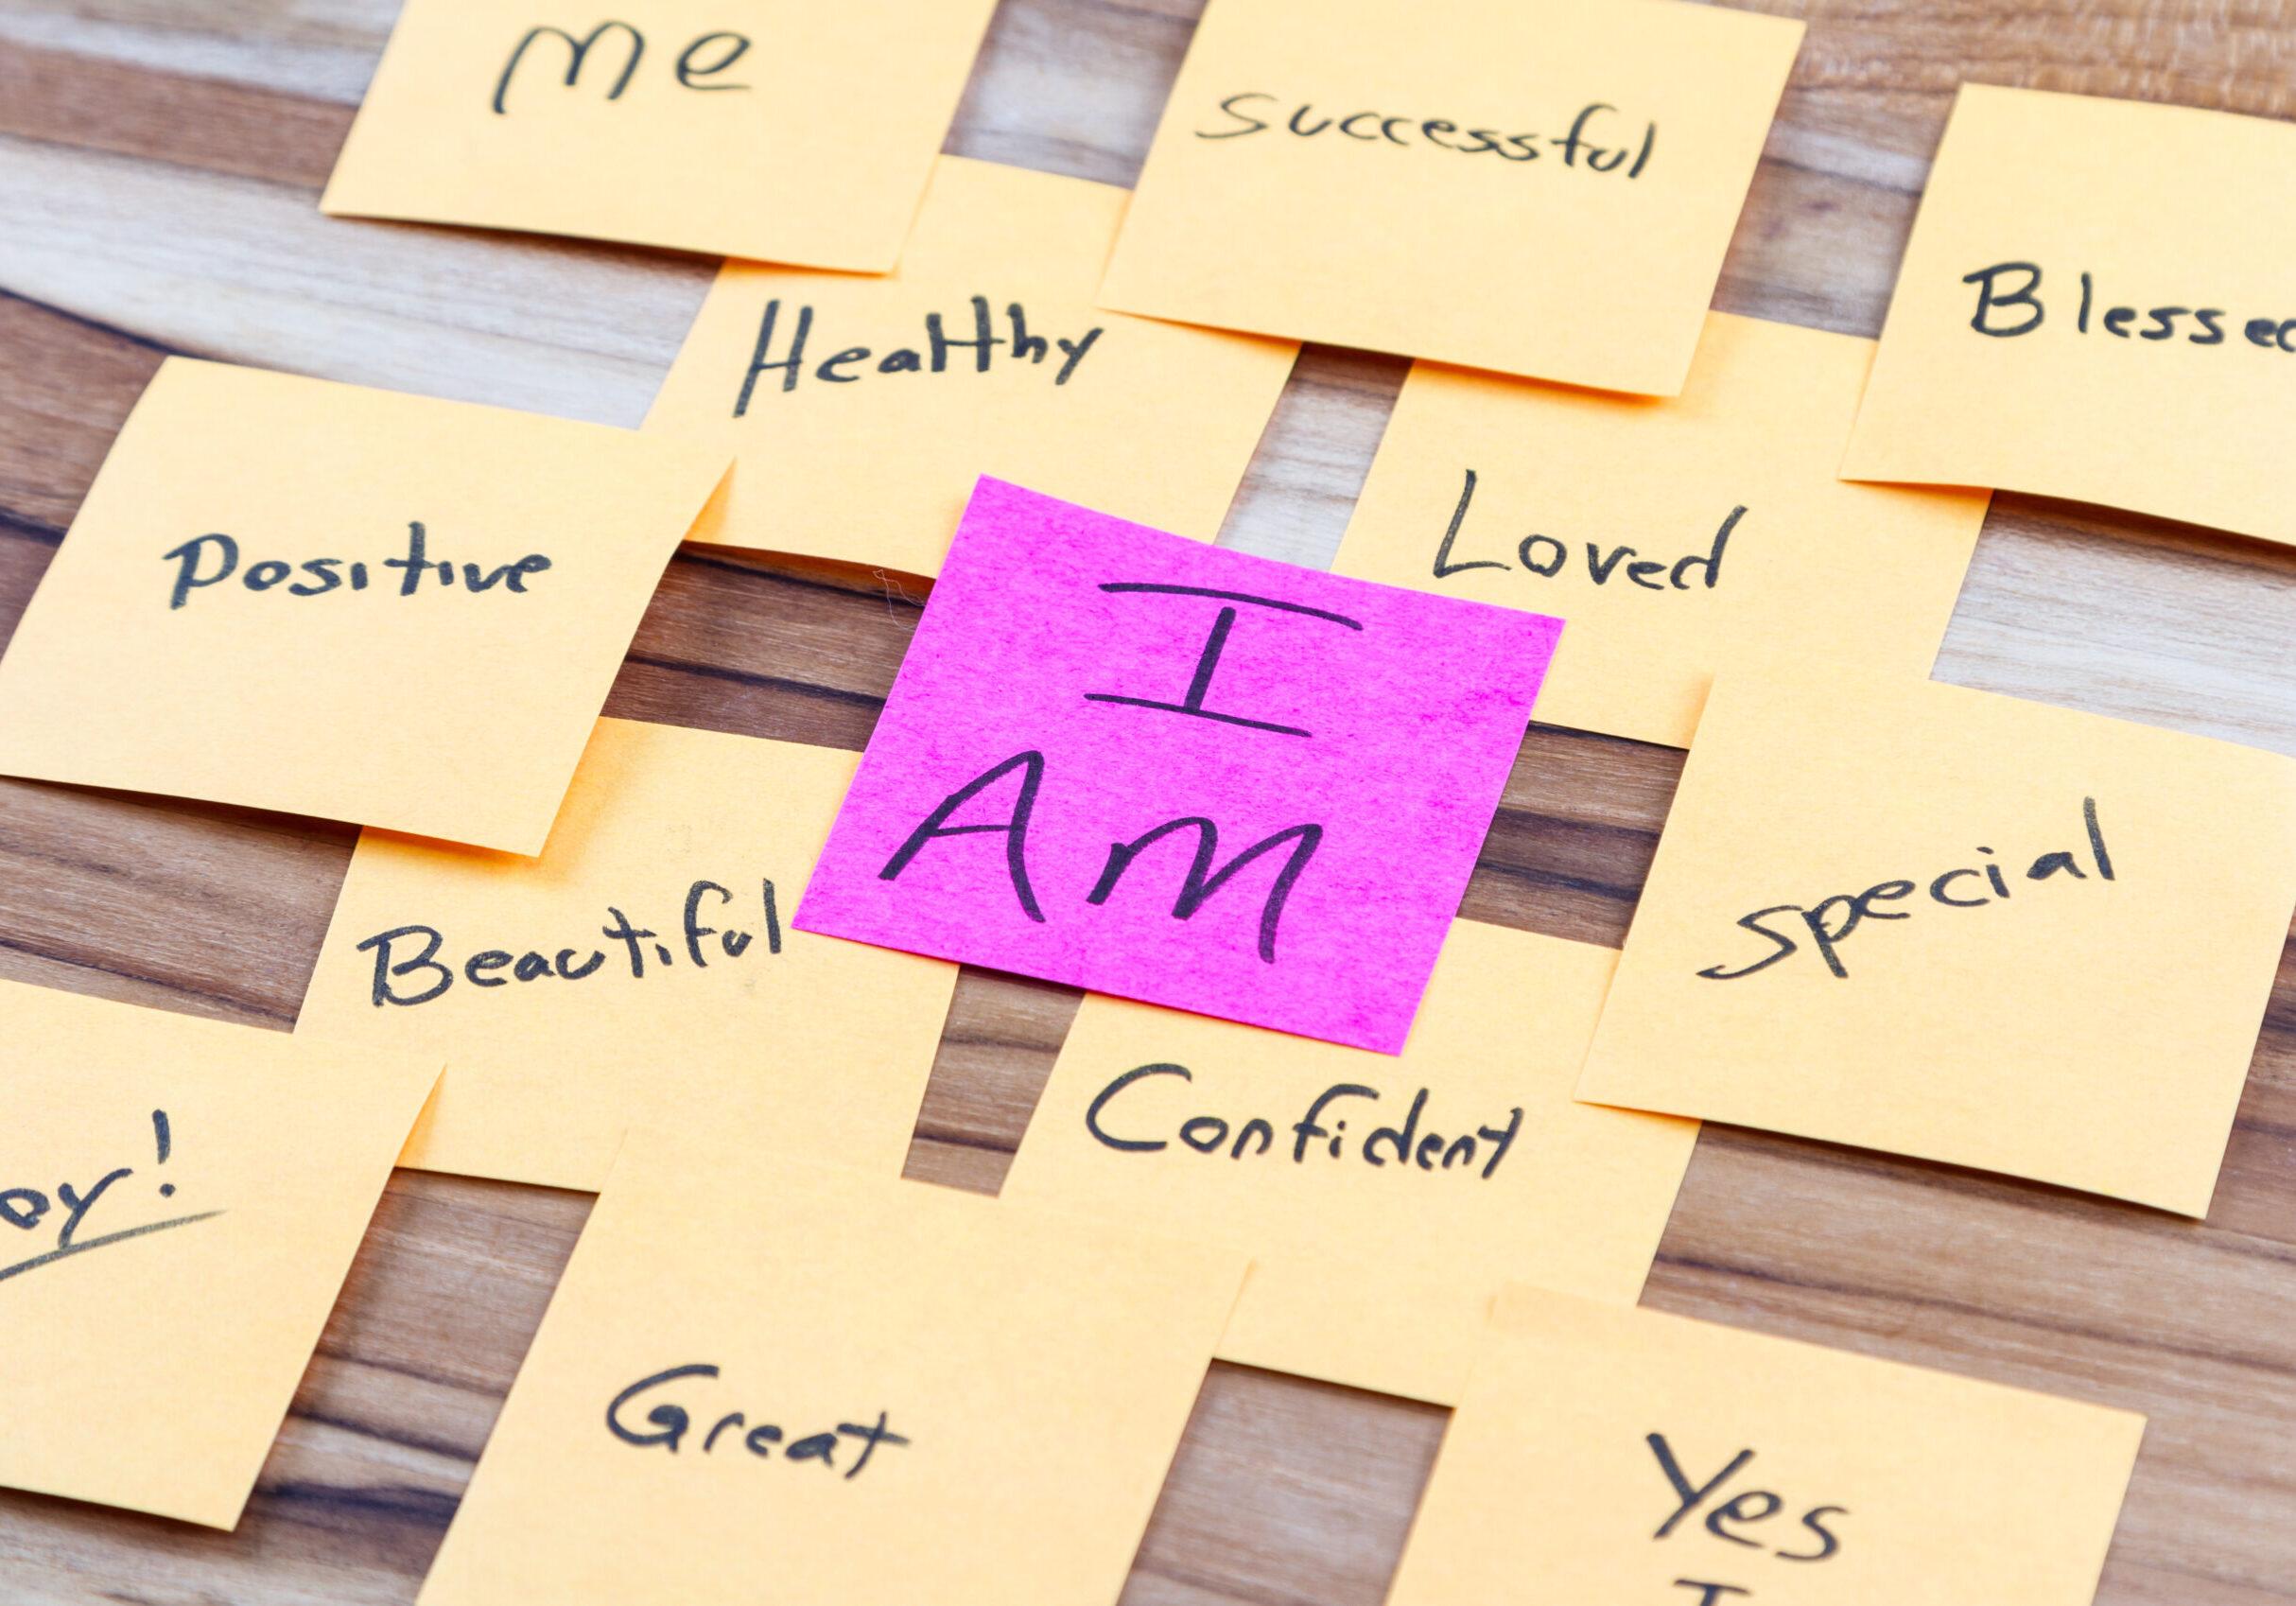 very powerful self help concept using positive messages and a I am floating above all the positive thoughts